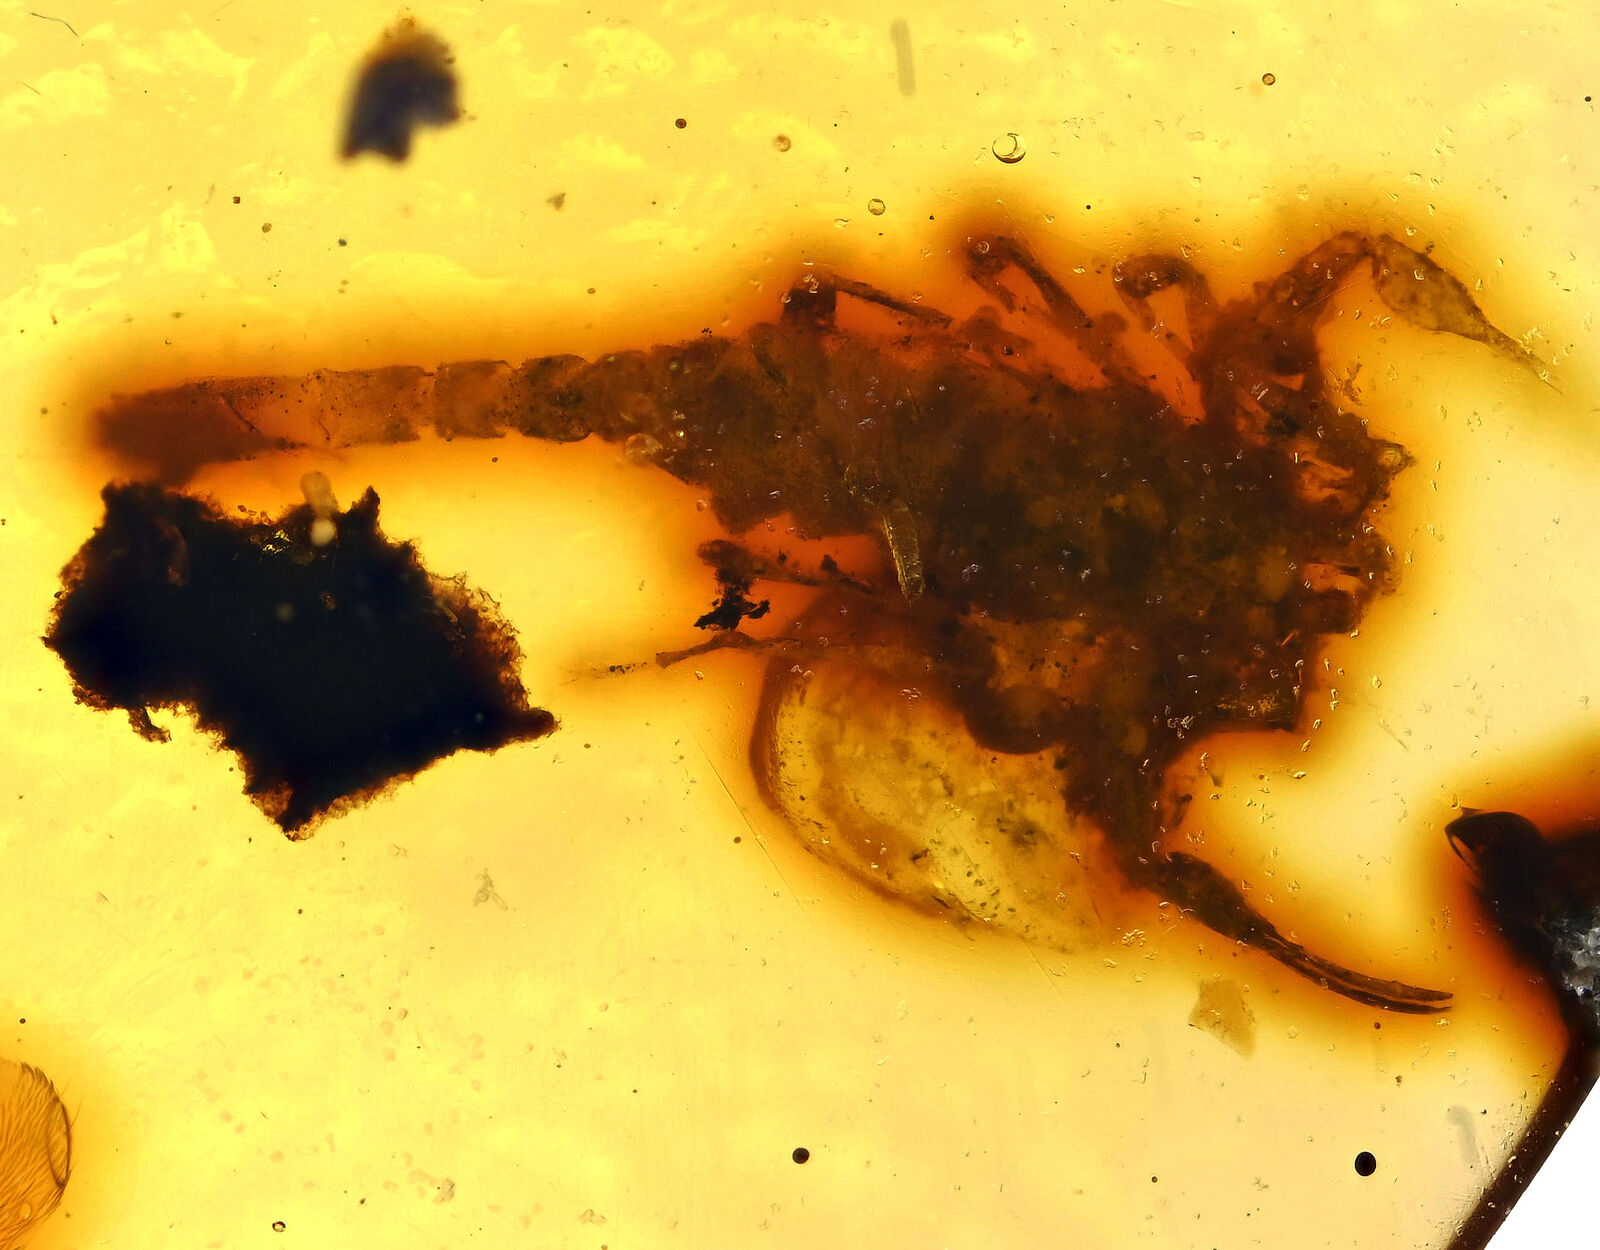 Rare Complete Scorpion with spider, Fossil inclusion in Burmese Amber